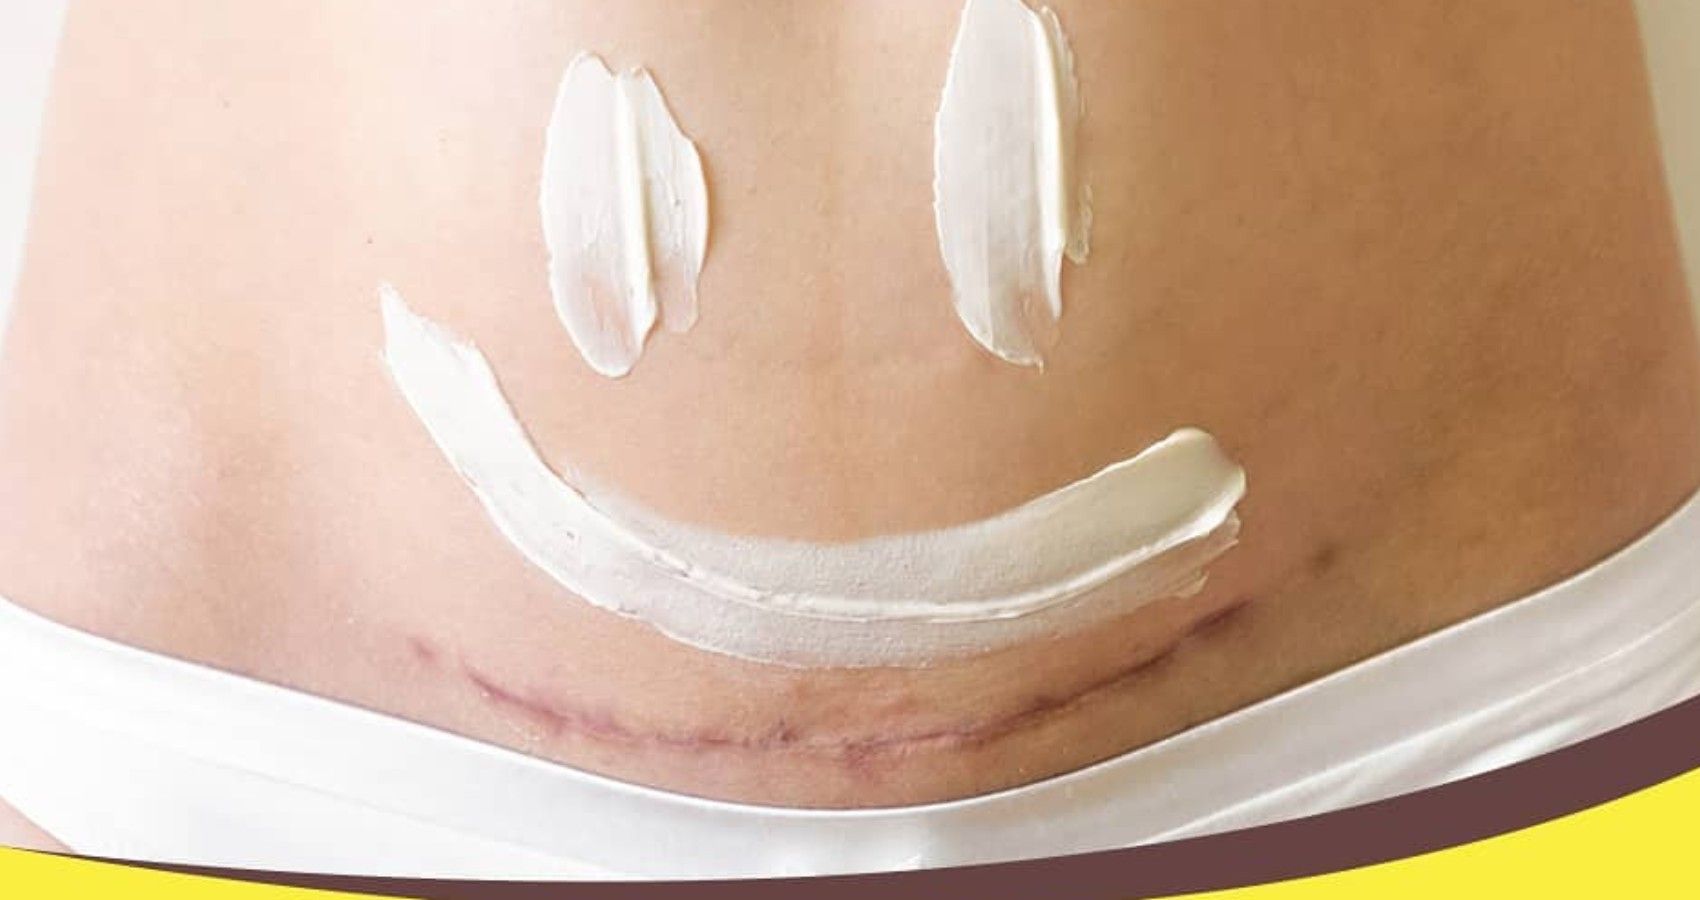 A c-section scar with a happy face in cream over top